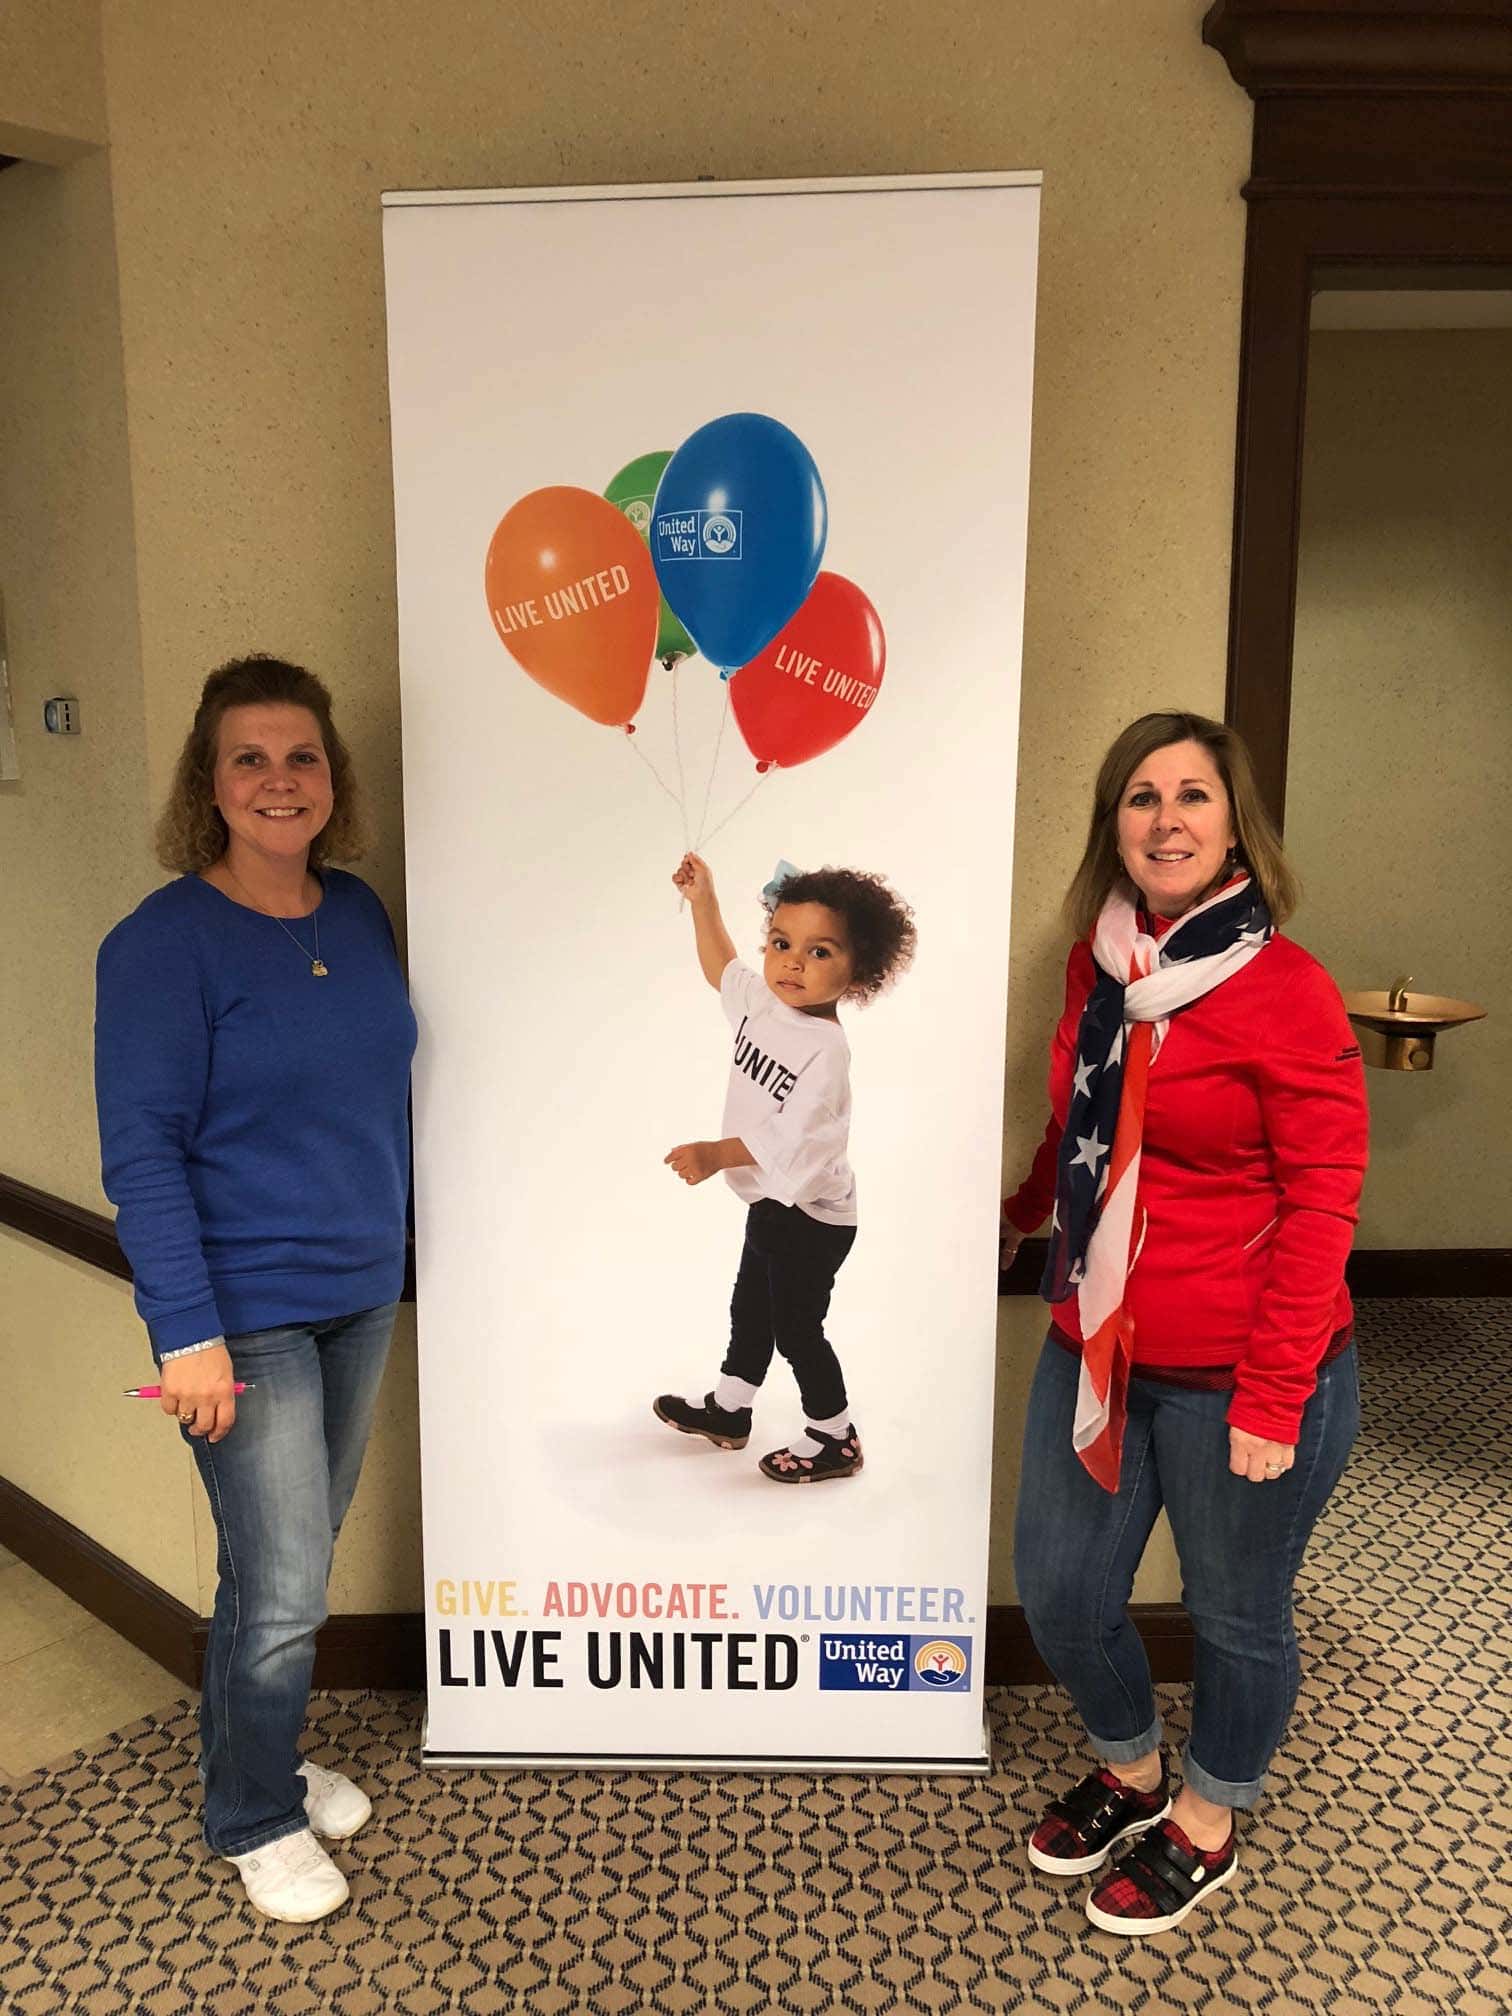 USA Day for United Way